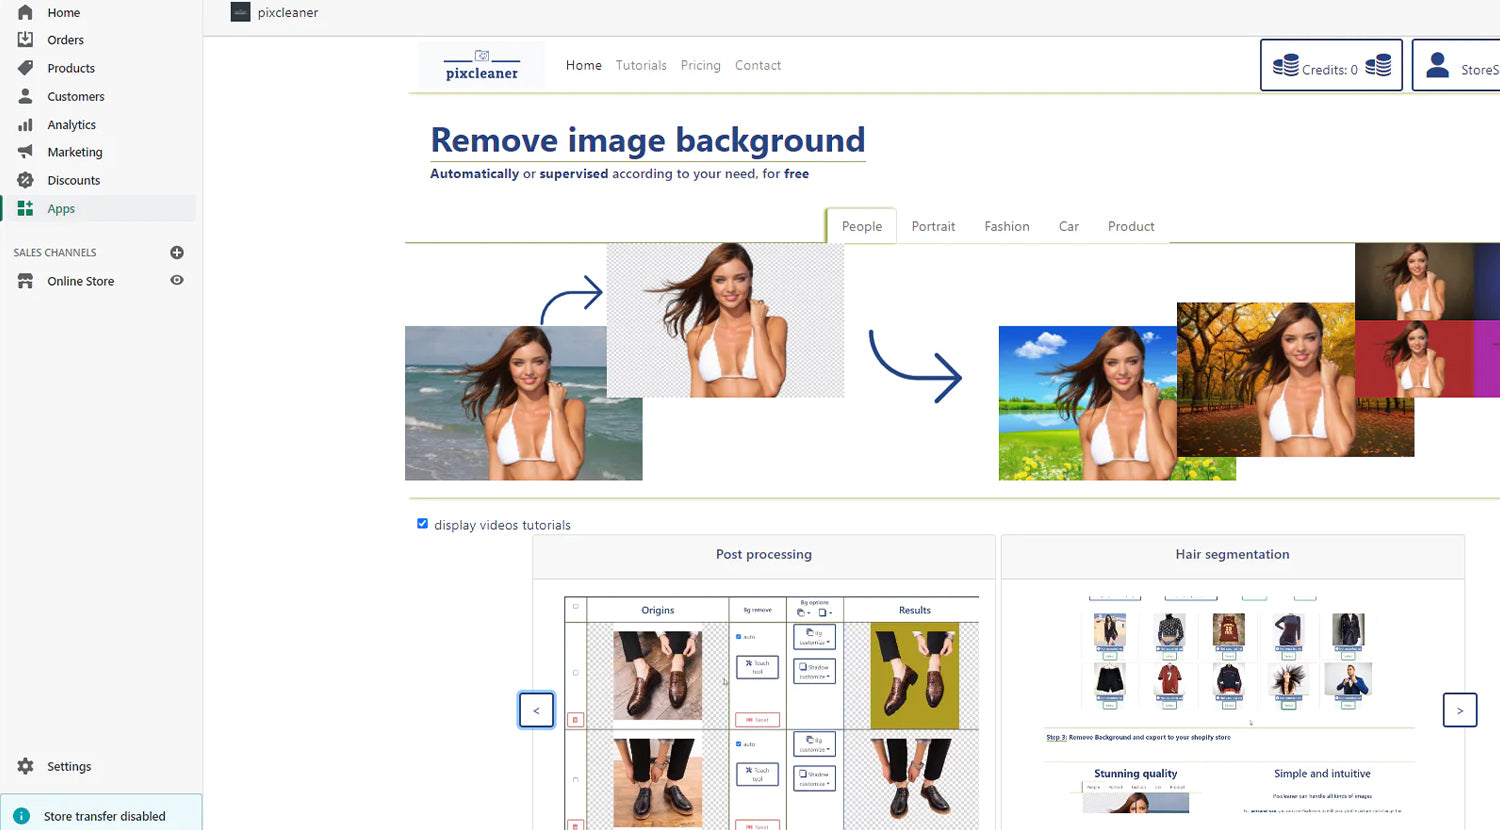 Pixcleaner Background Remover allows you to quickly remove the background of your product photos.